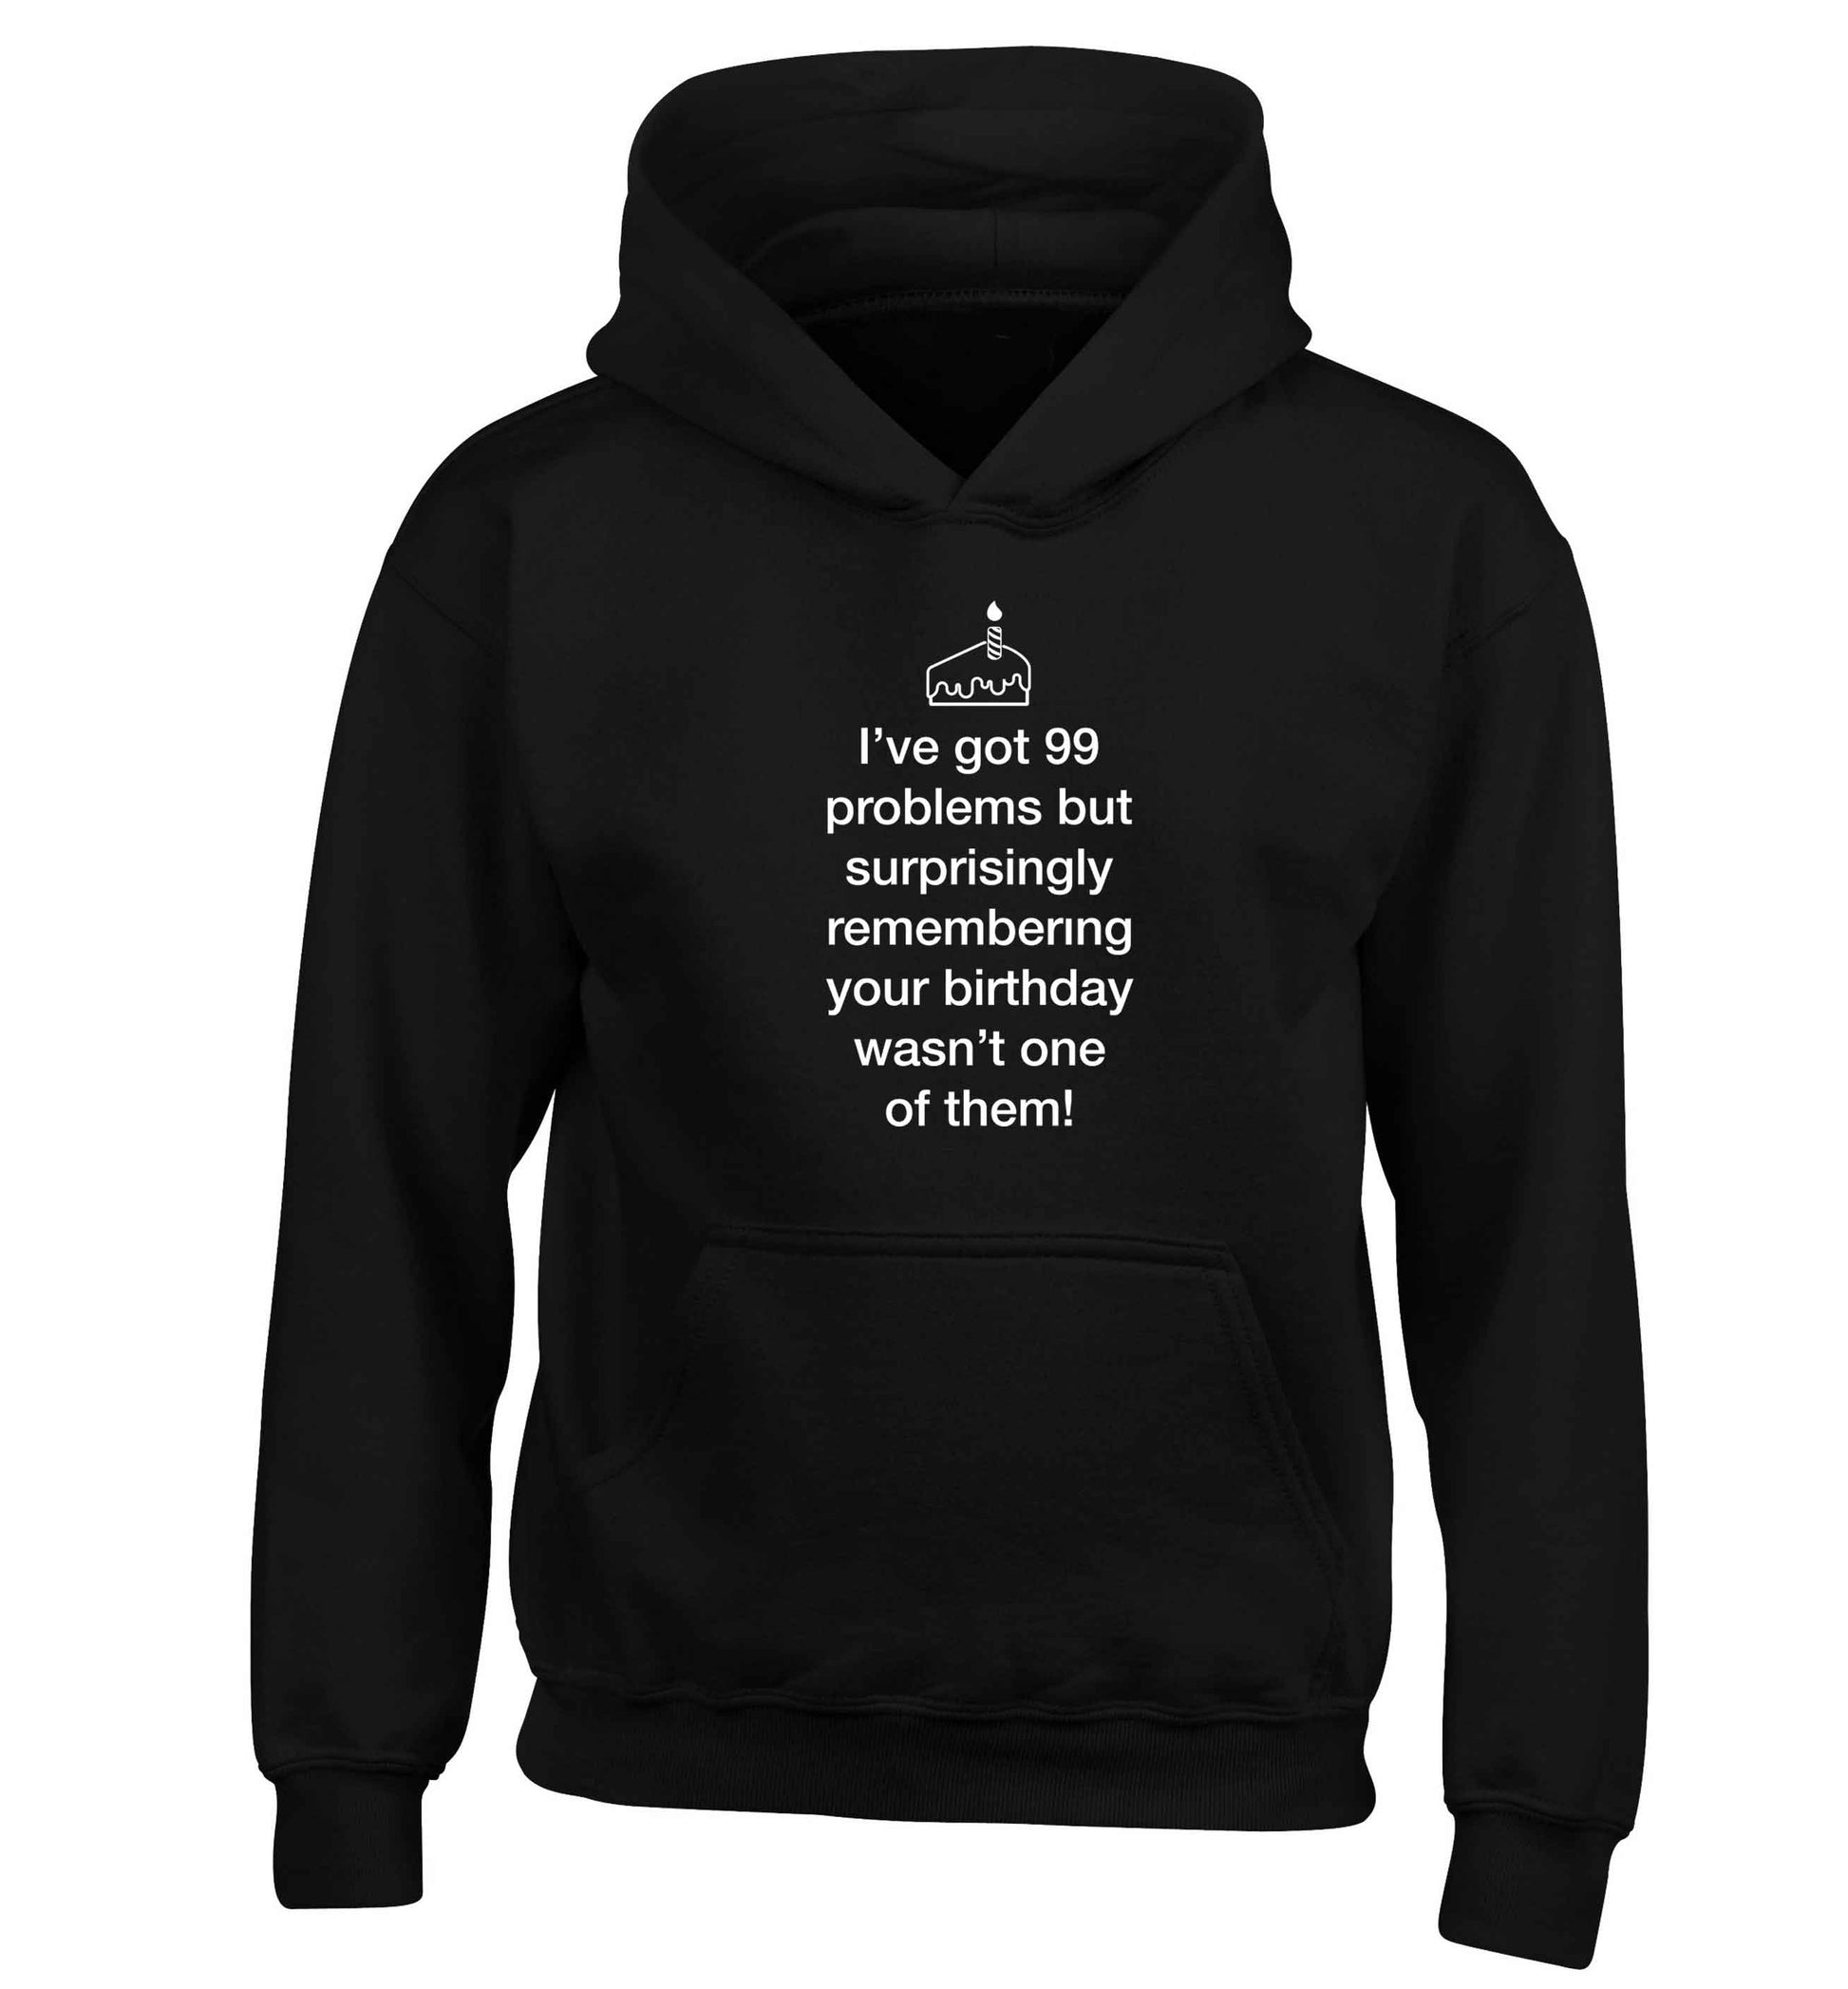 I've got 99 problems but surprisingly remembering your birthday wasn't one of them! children's black hoodie 12-13 Years